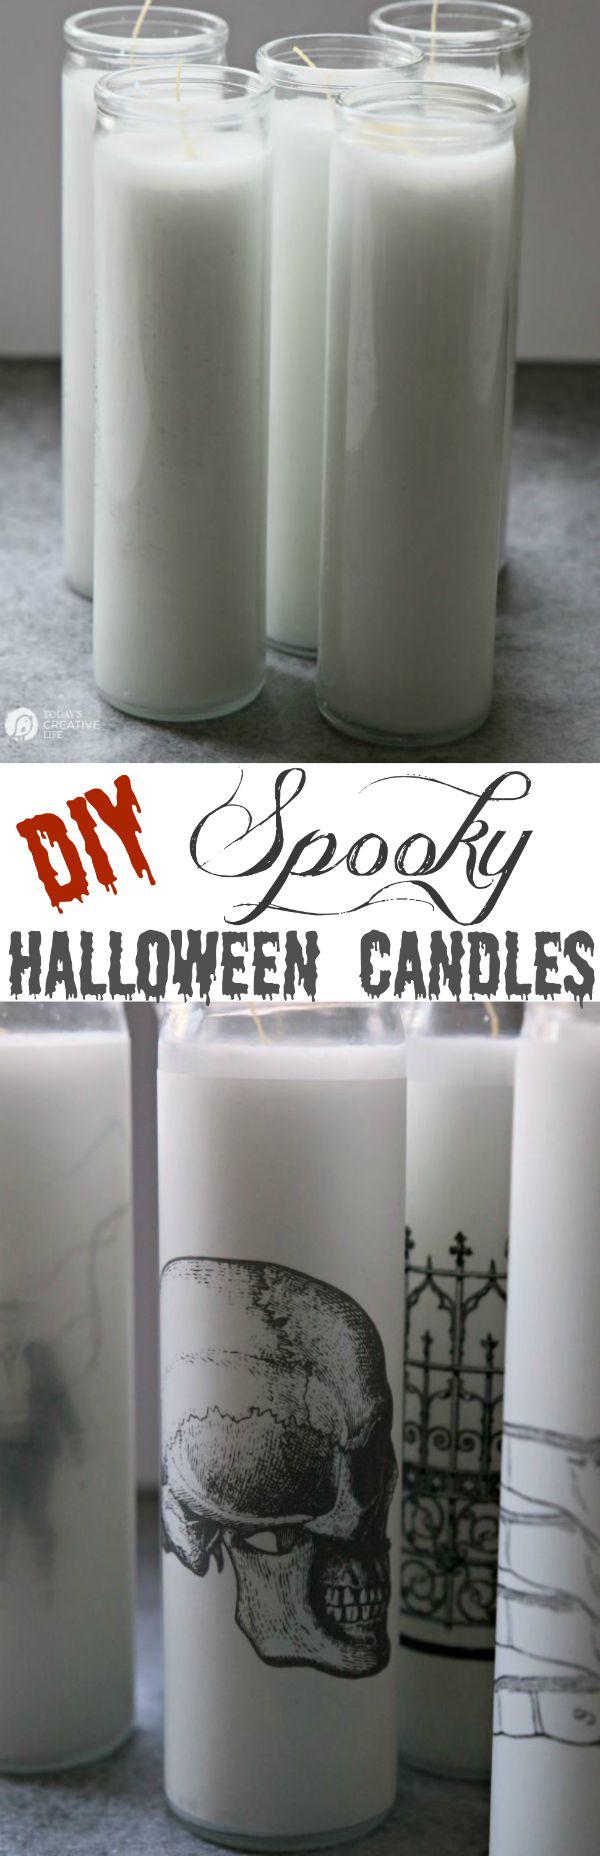 DIY spooky candles with skulls and bones